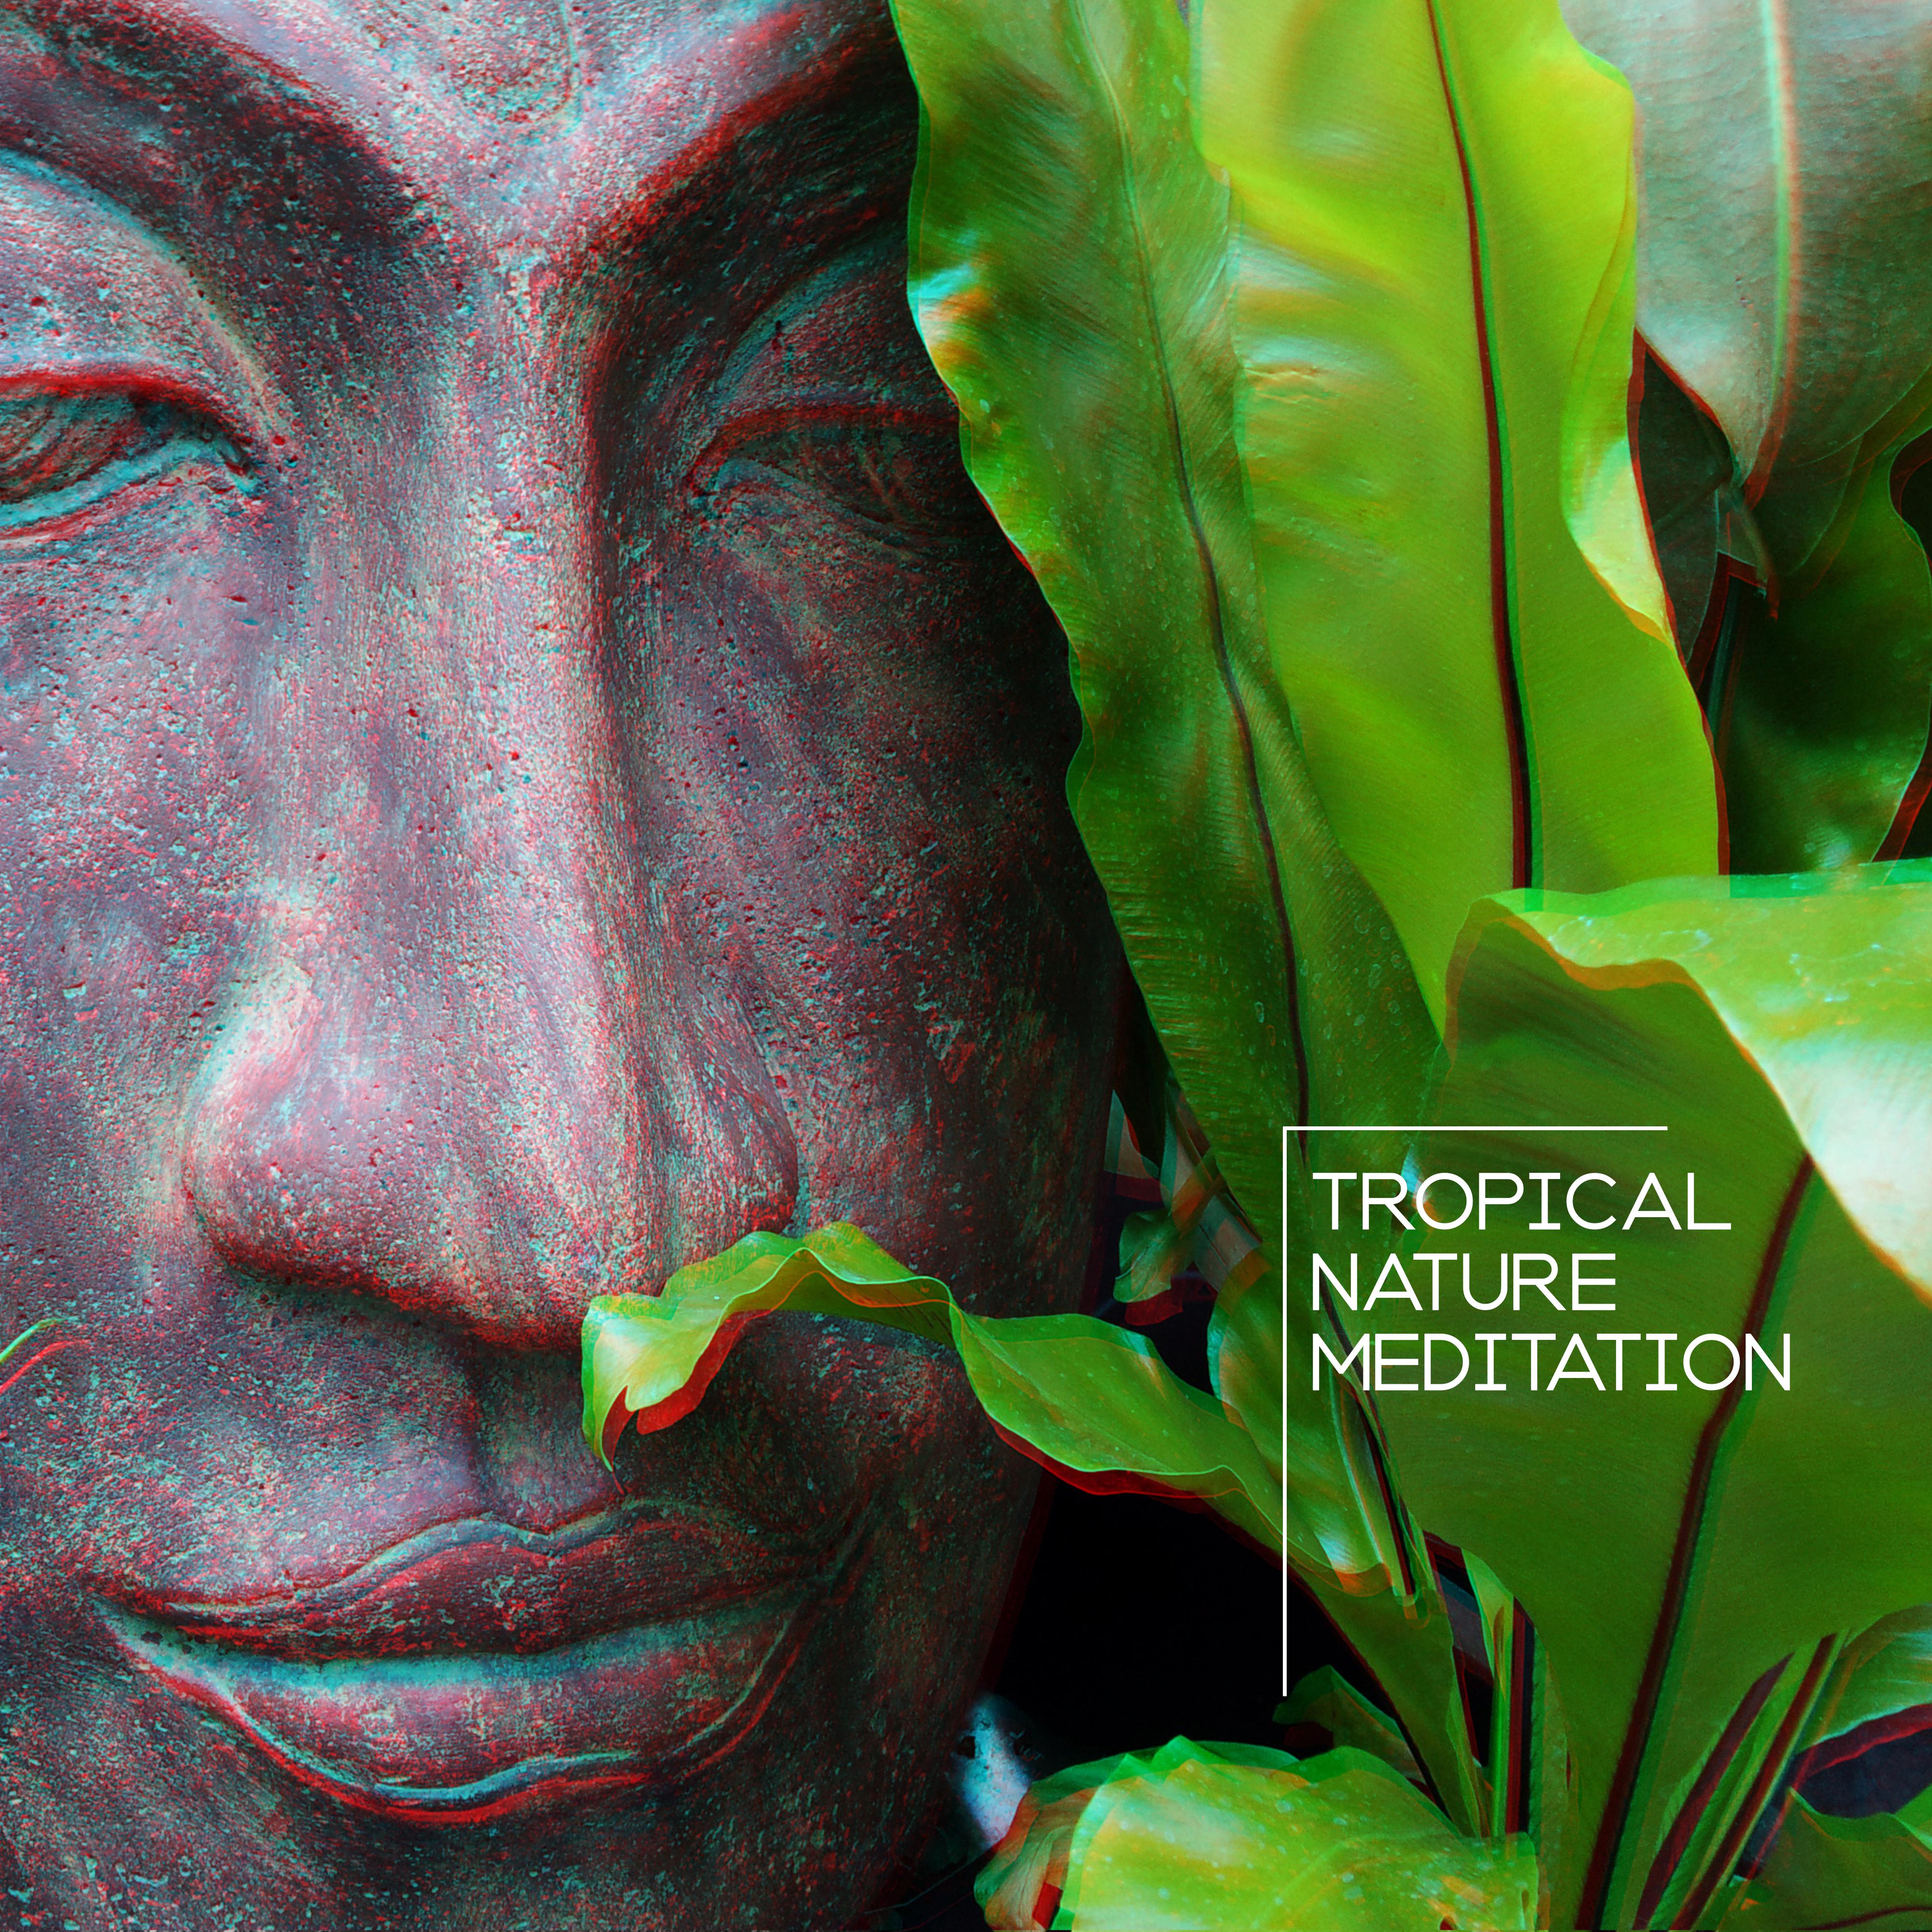 Tropical Nature Meditation: 2019 New Age Music for Yoga Training & Relaxation, Songs Straight from the Tropical Island, Sounds of the Jungle, Nature Meditation Time